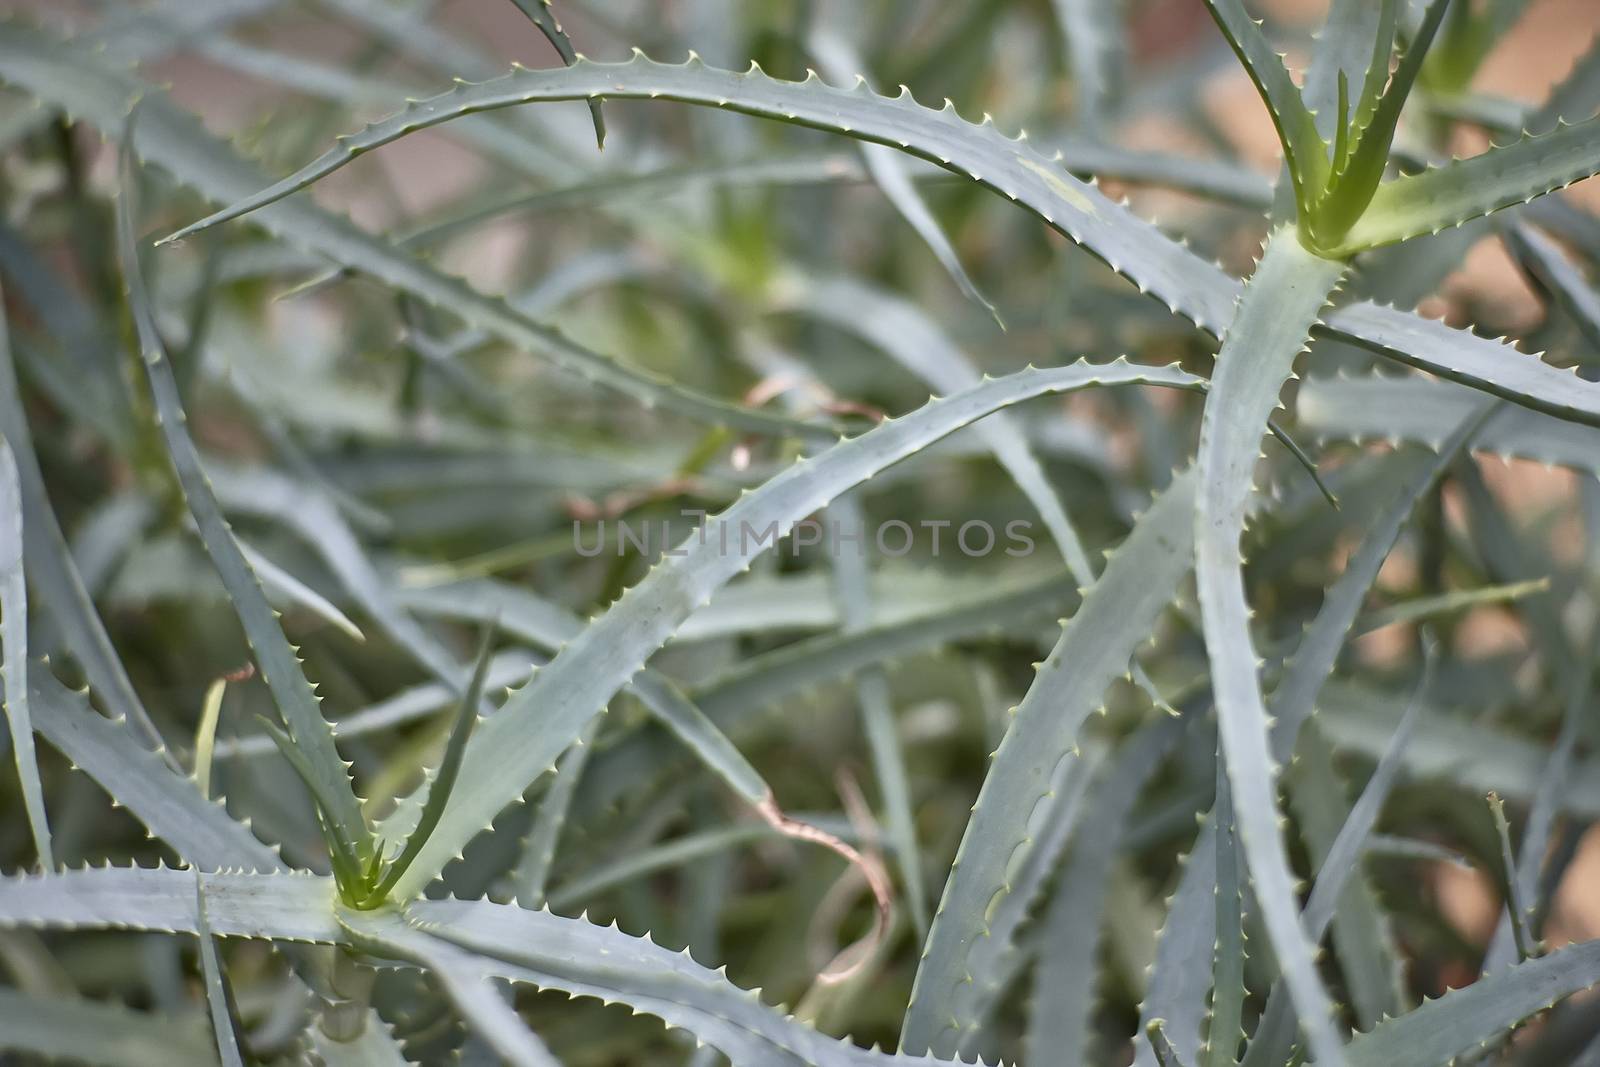 Detail of some parts of the aloe plant: exotic plant used for the care and well-being of man.